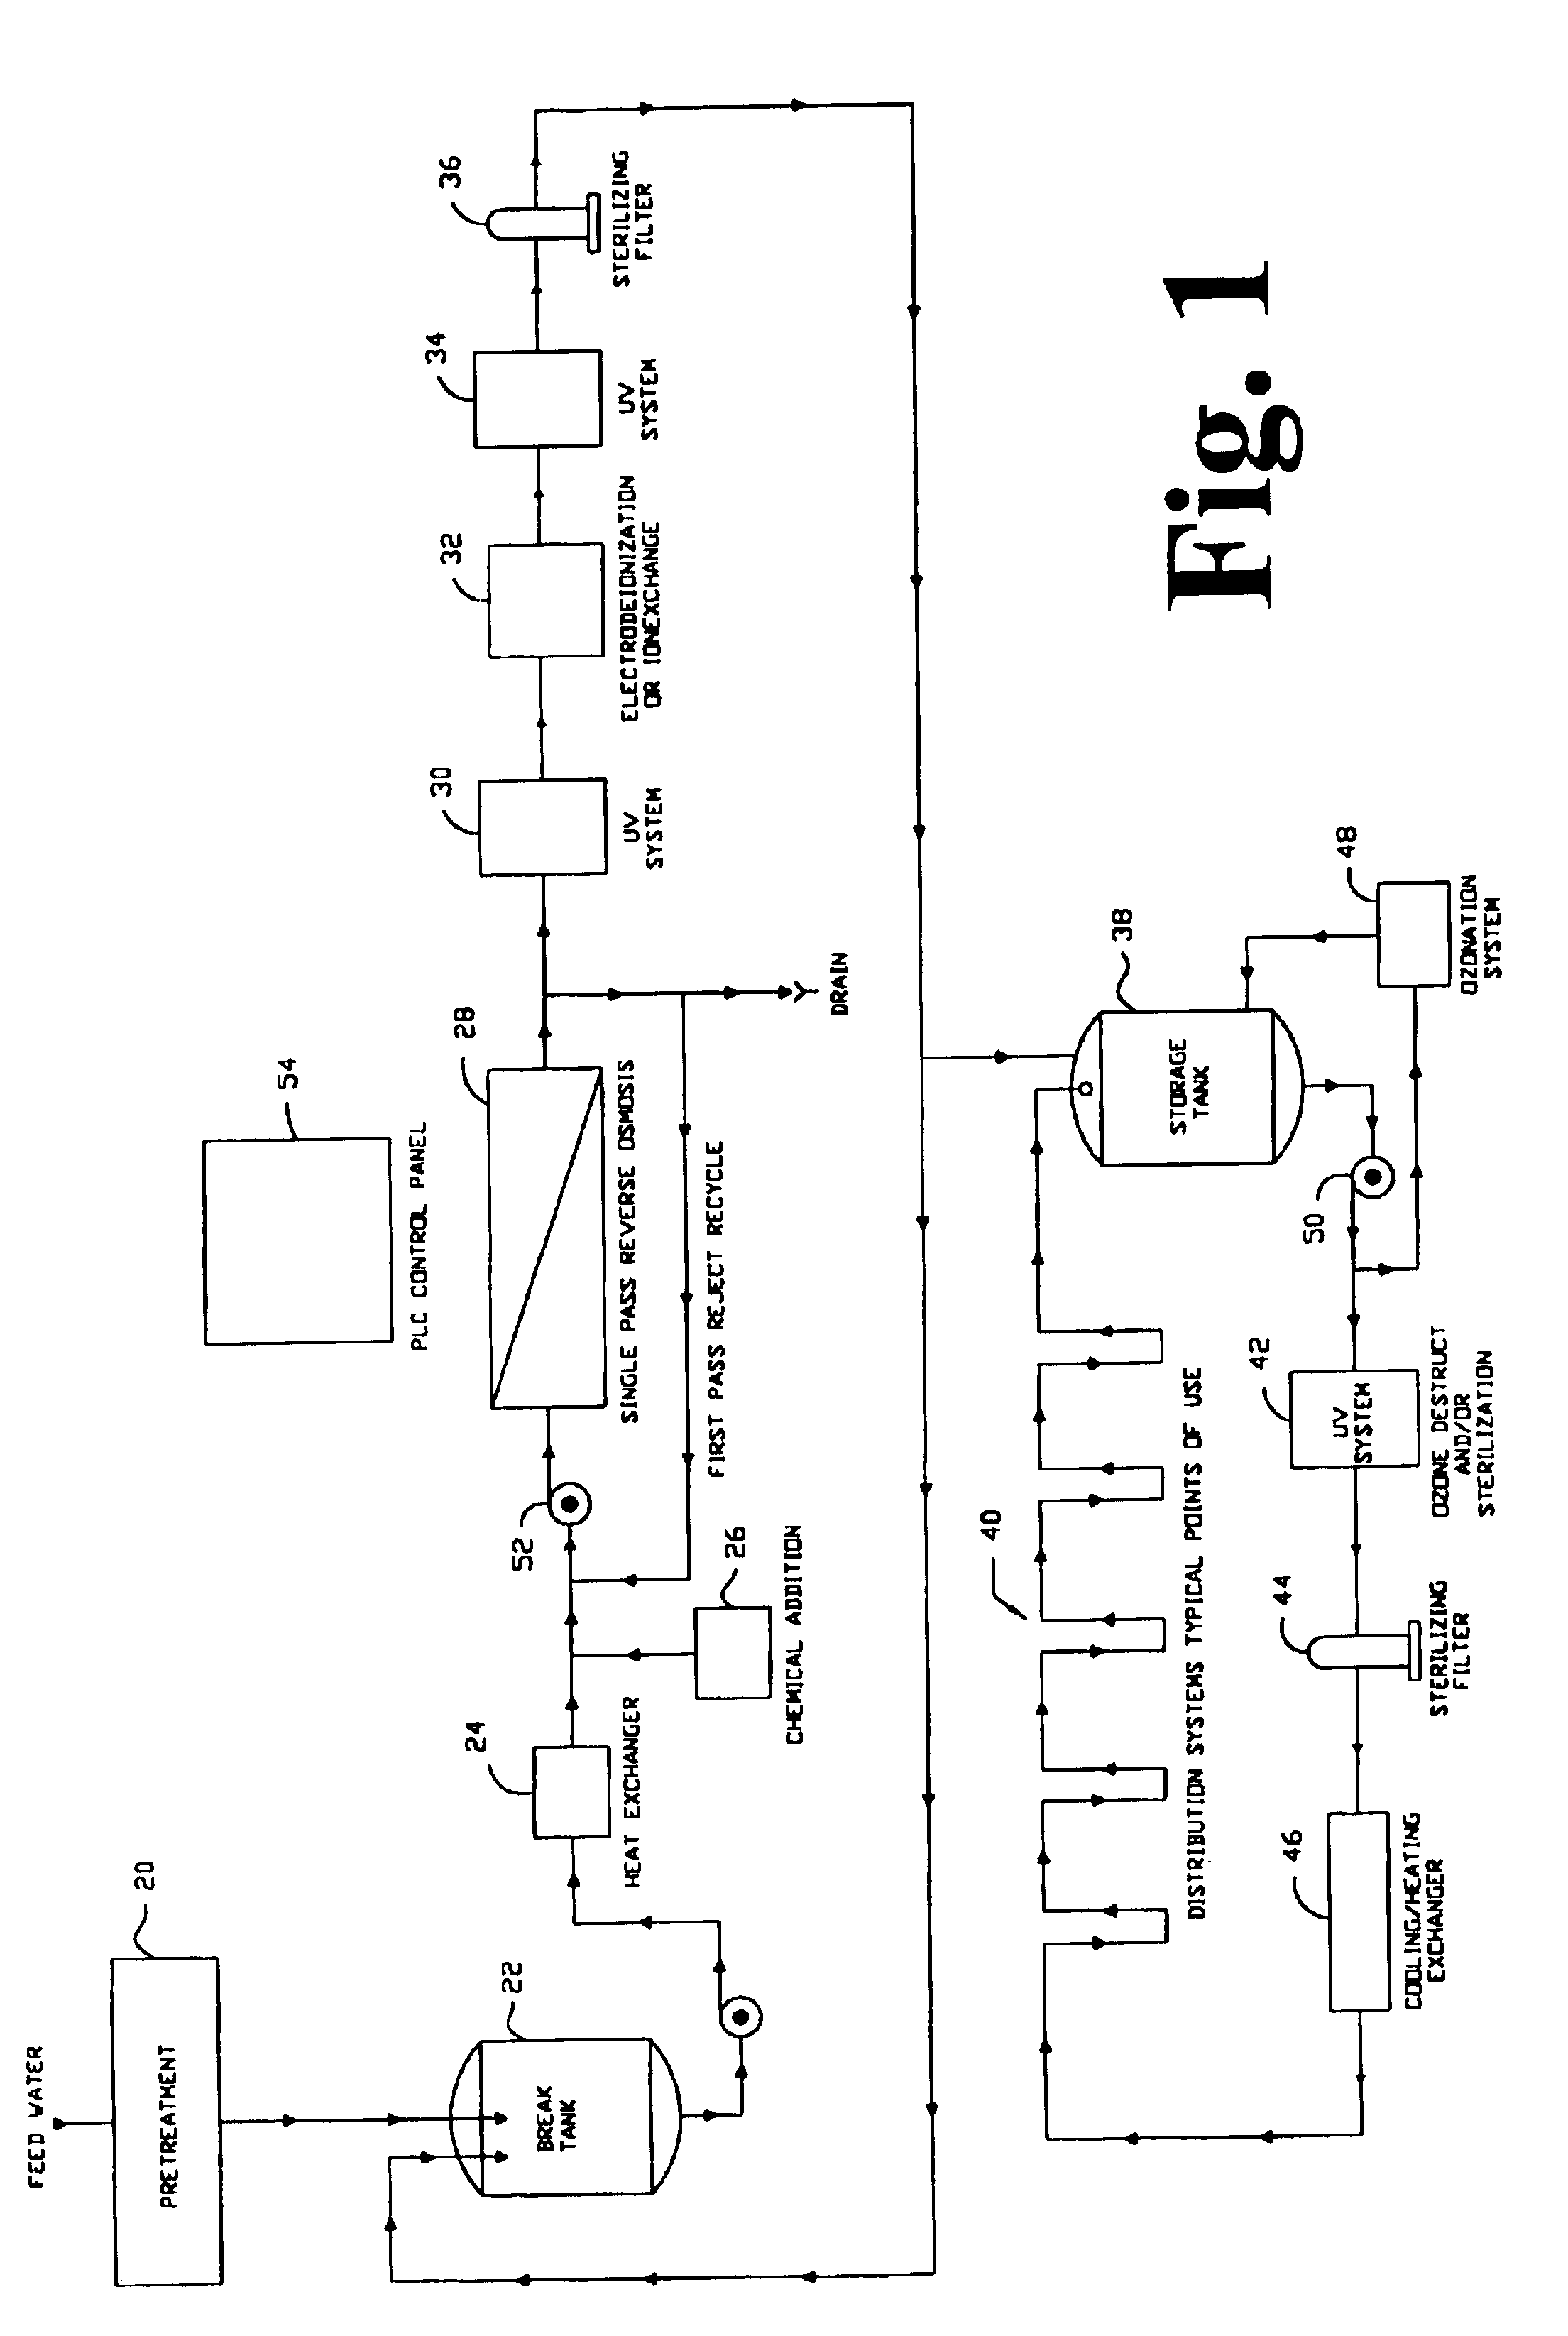 Apparatus and method for producing purified water having microbiological purity